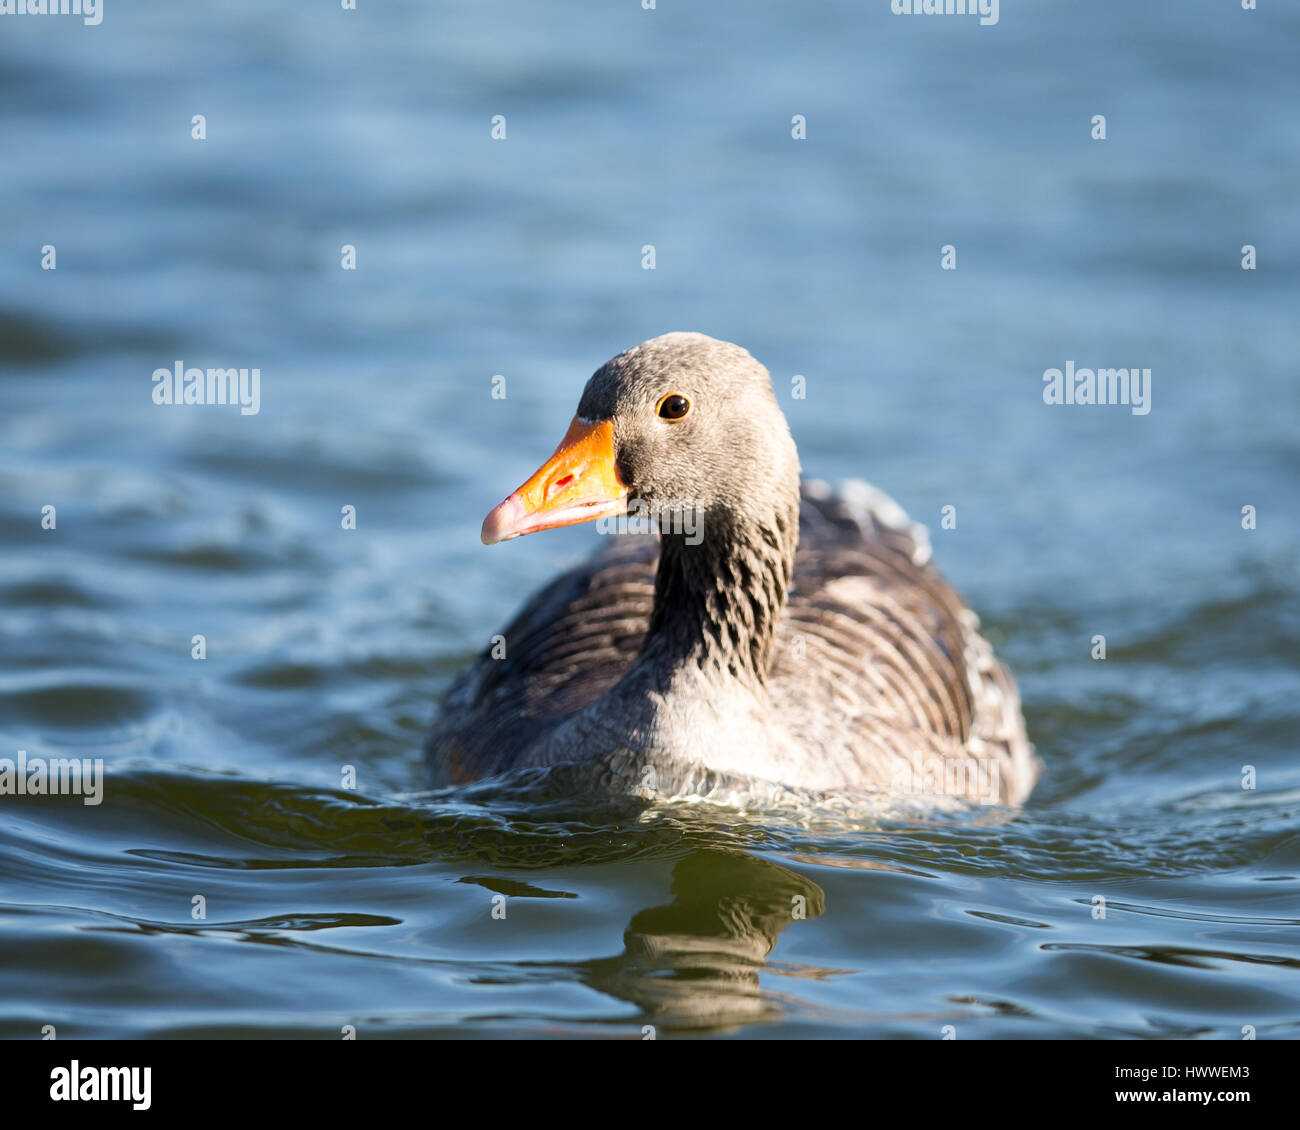 A Greylag Goose in a lake Stock Photo